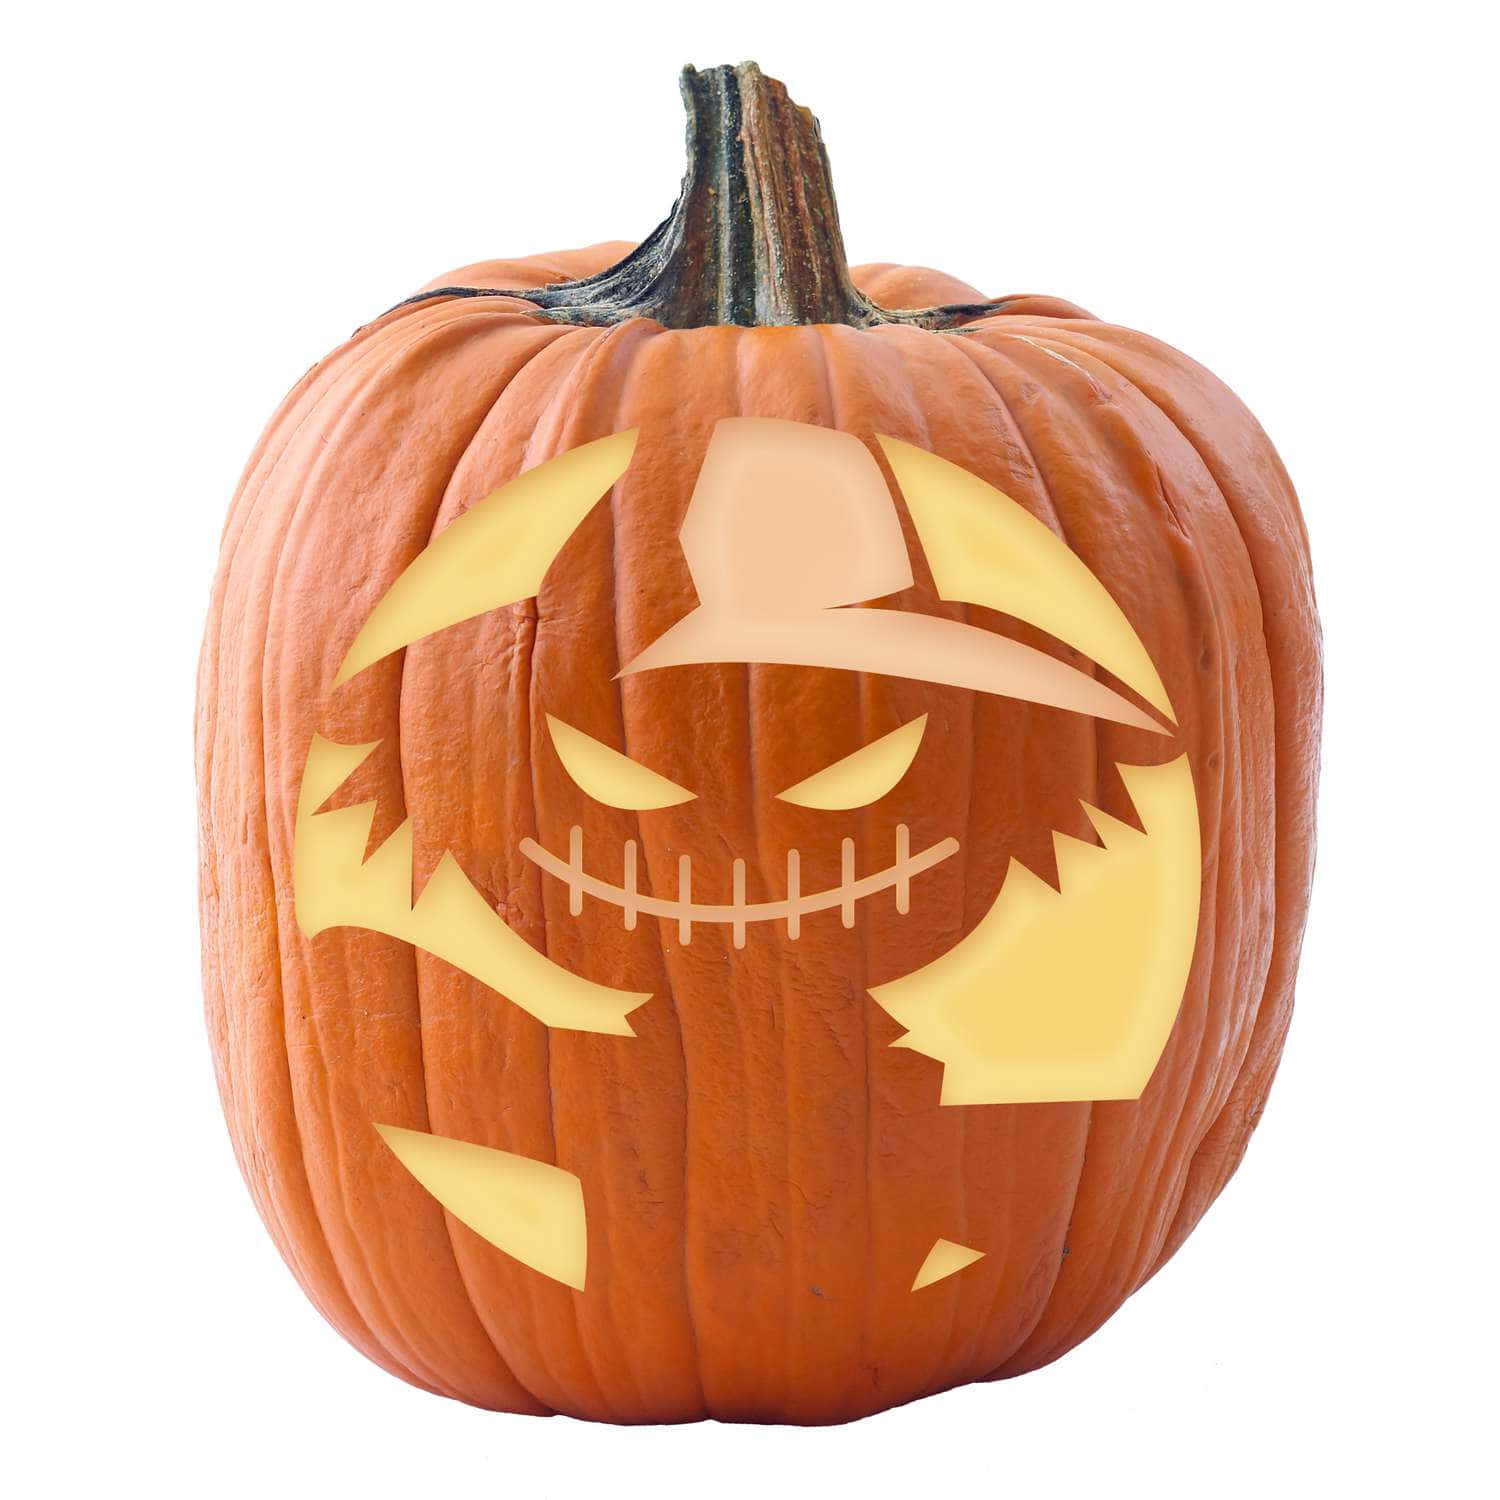 Tall Halloween Pumpkin Carving Pictures